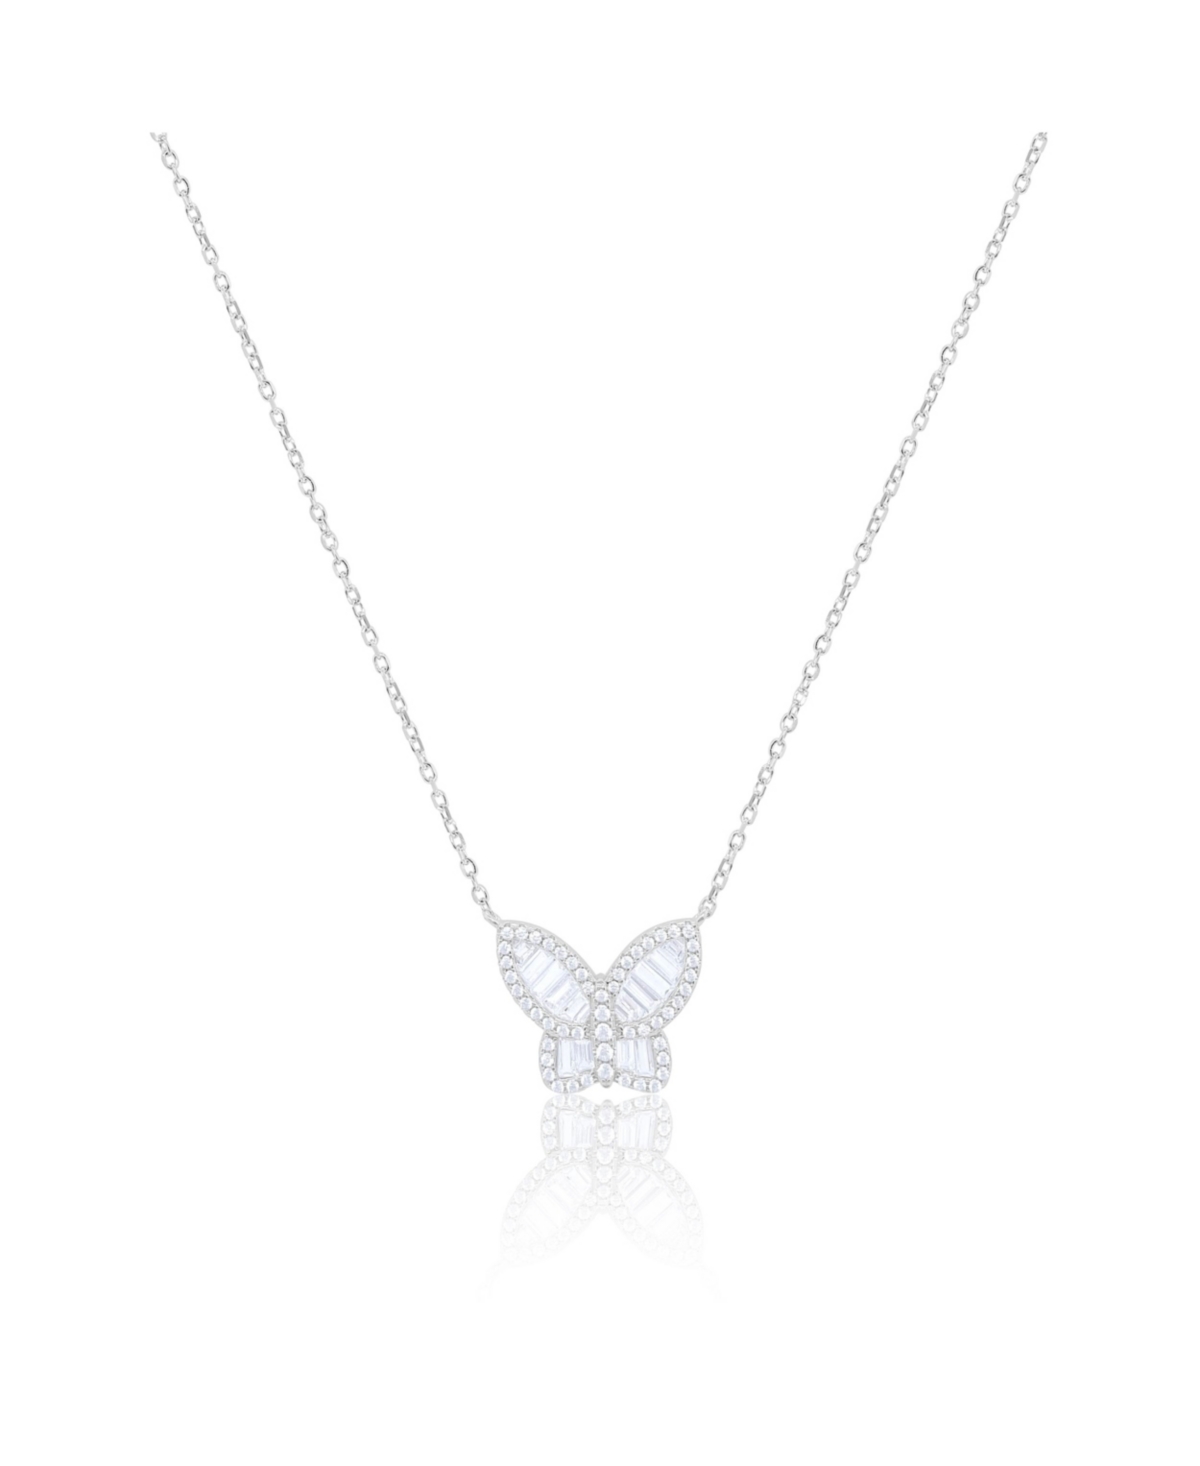 White Gold Cz Baguette Butterfly Necklace - White